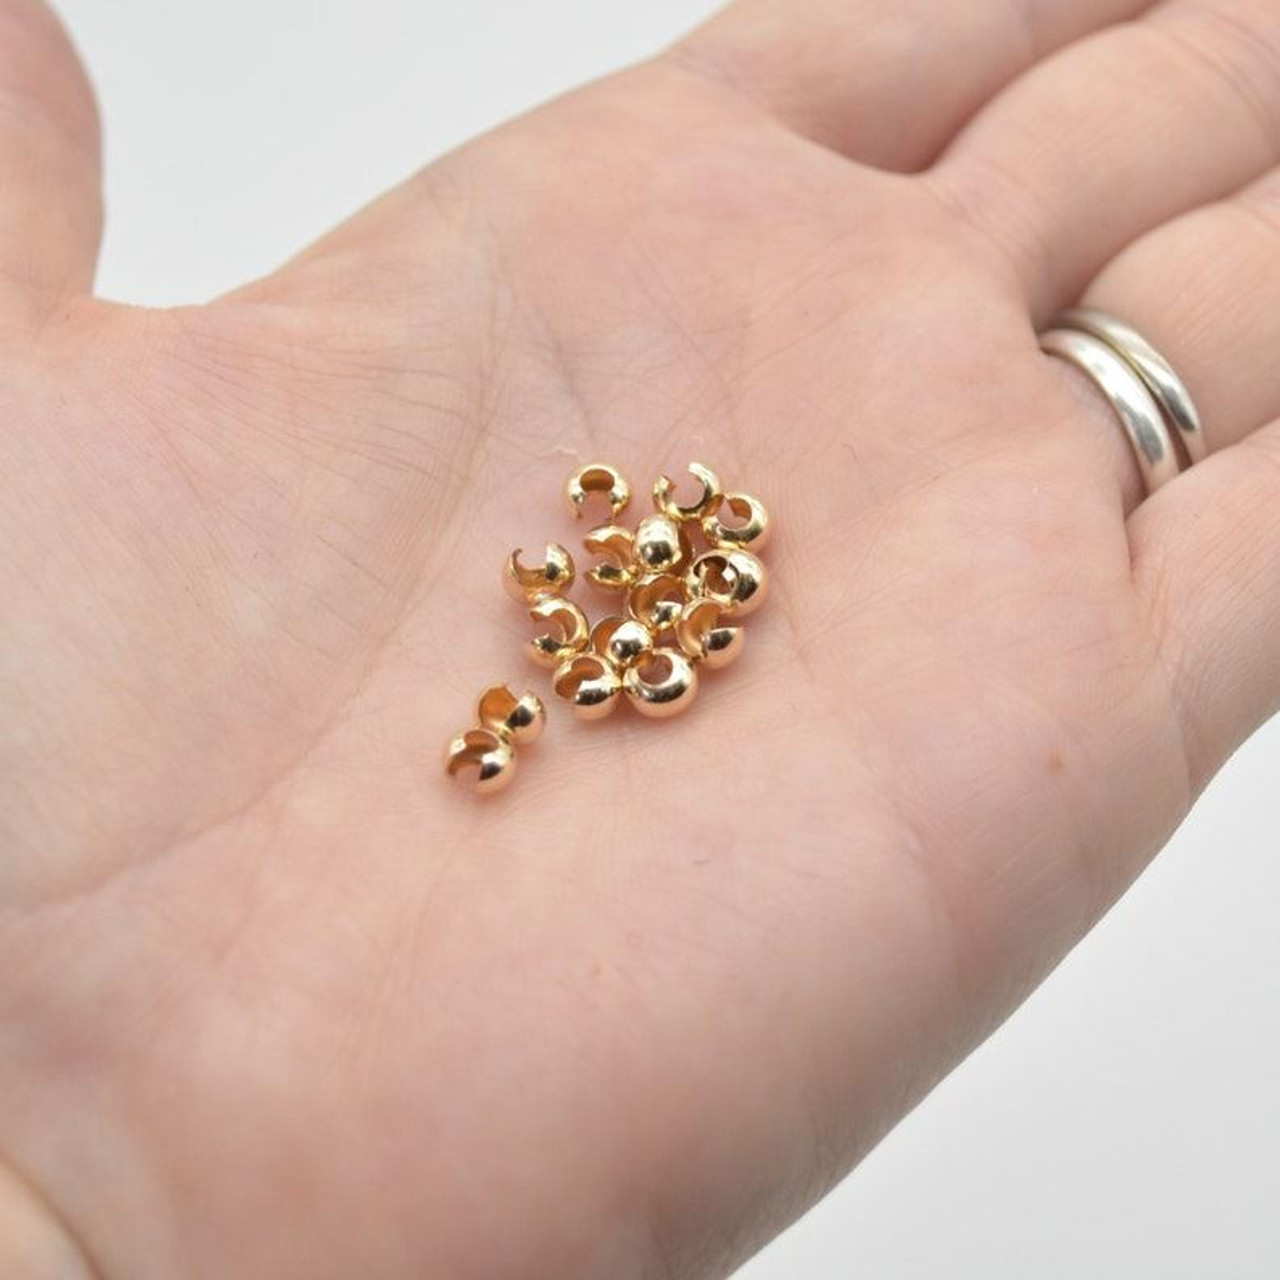 4mm Crimp Bead Covers, Gold Filled (20 Pieces)